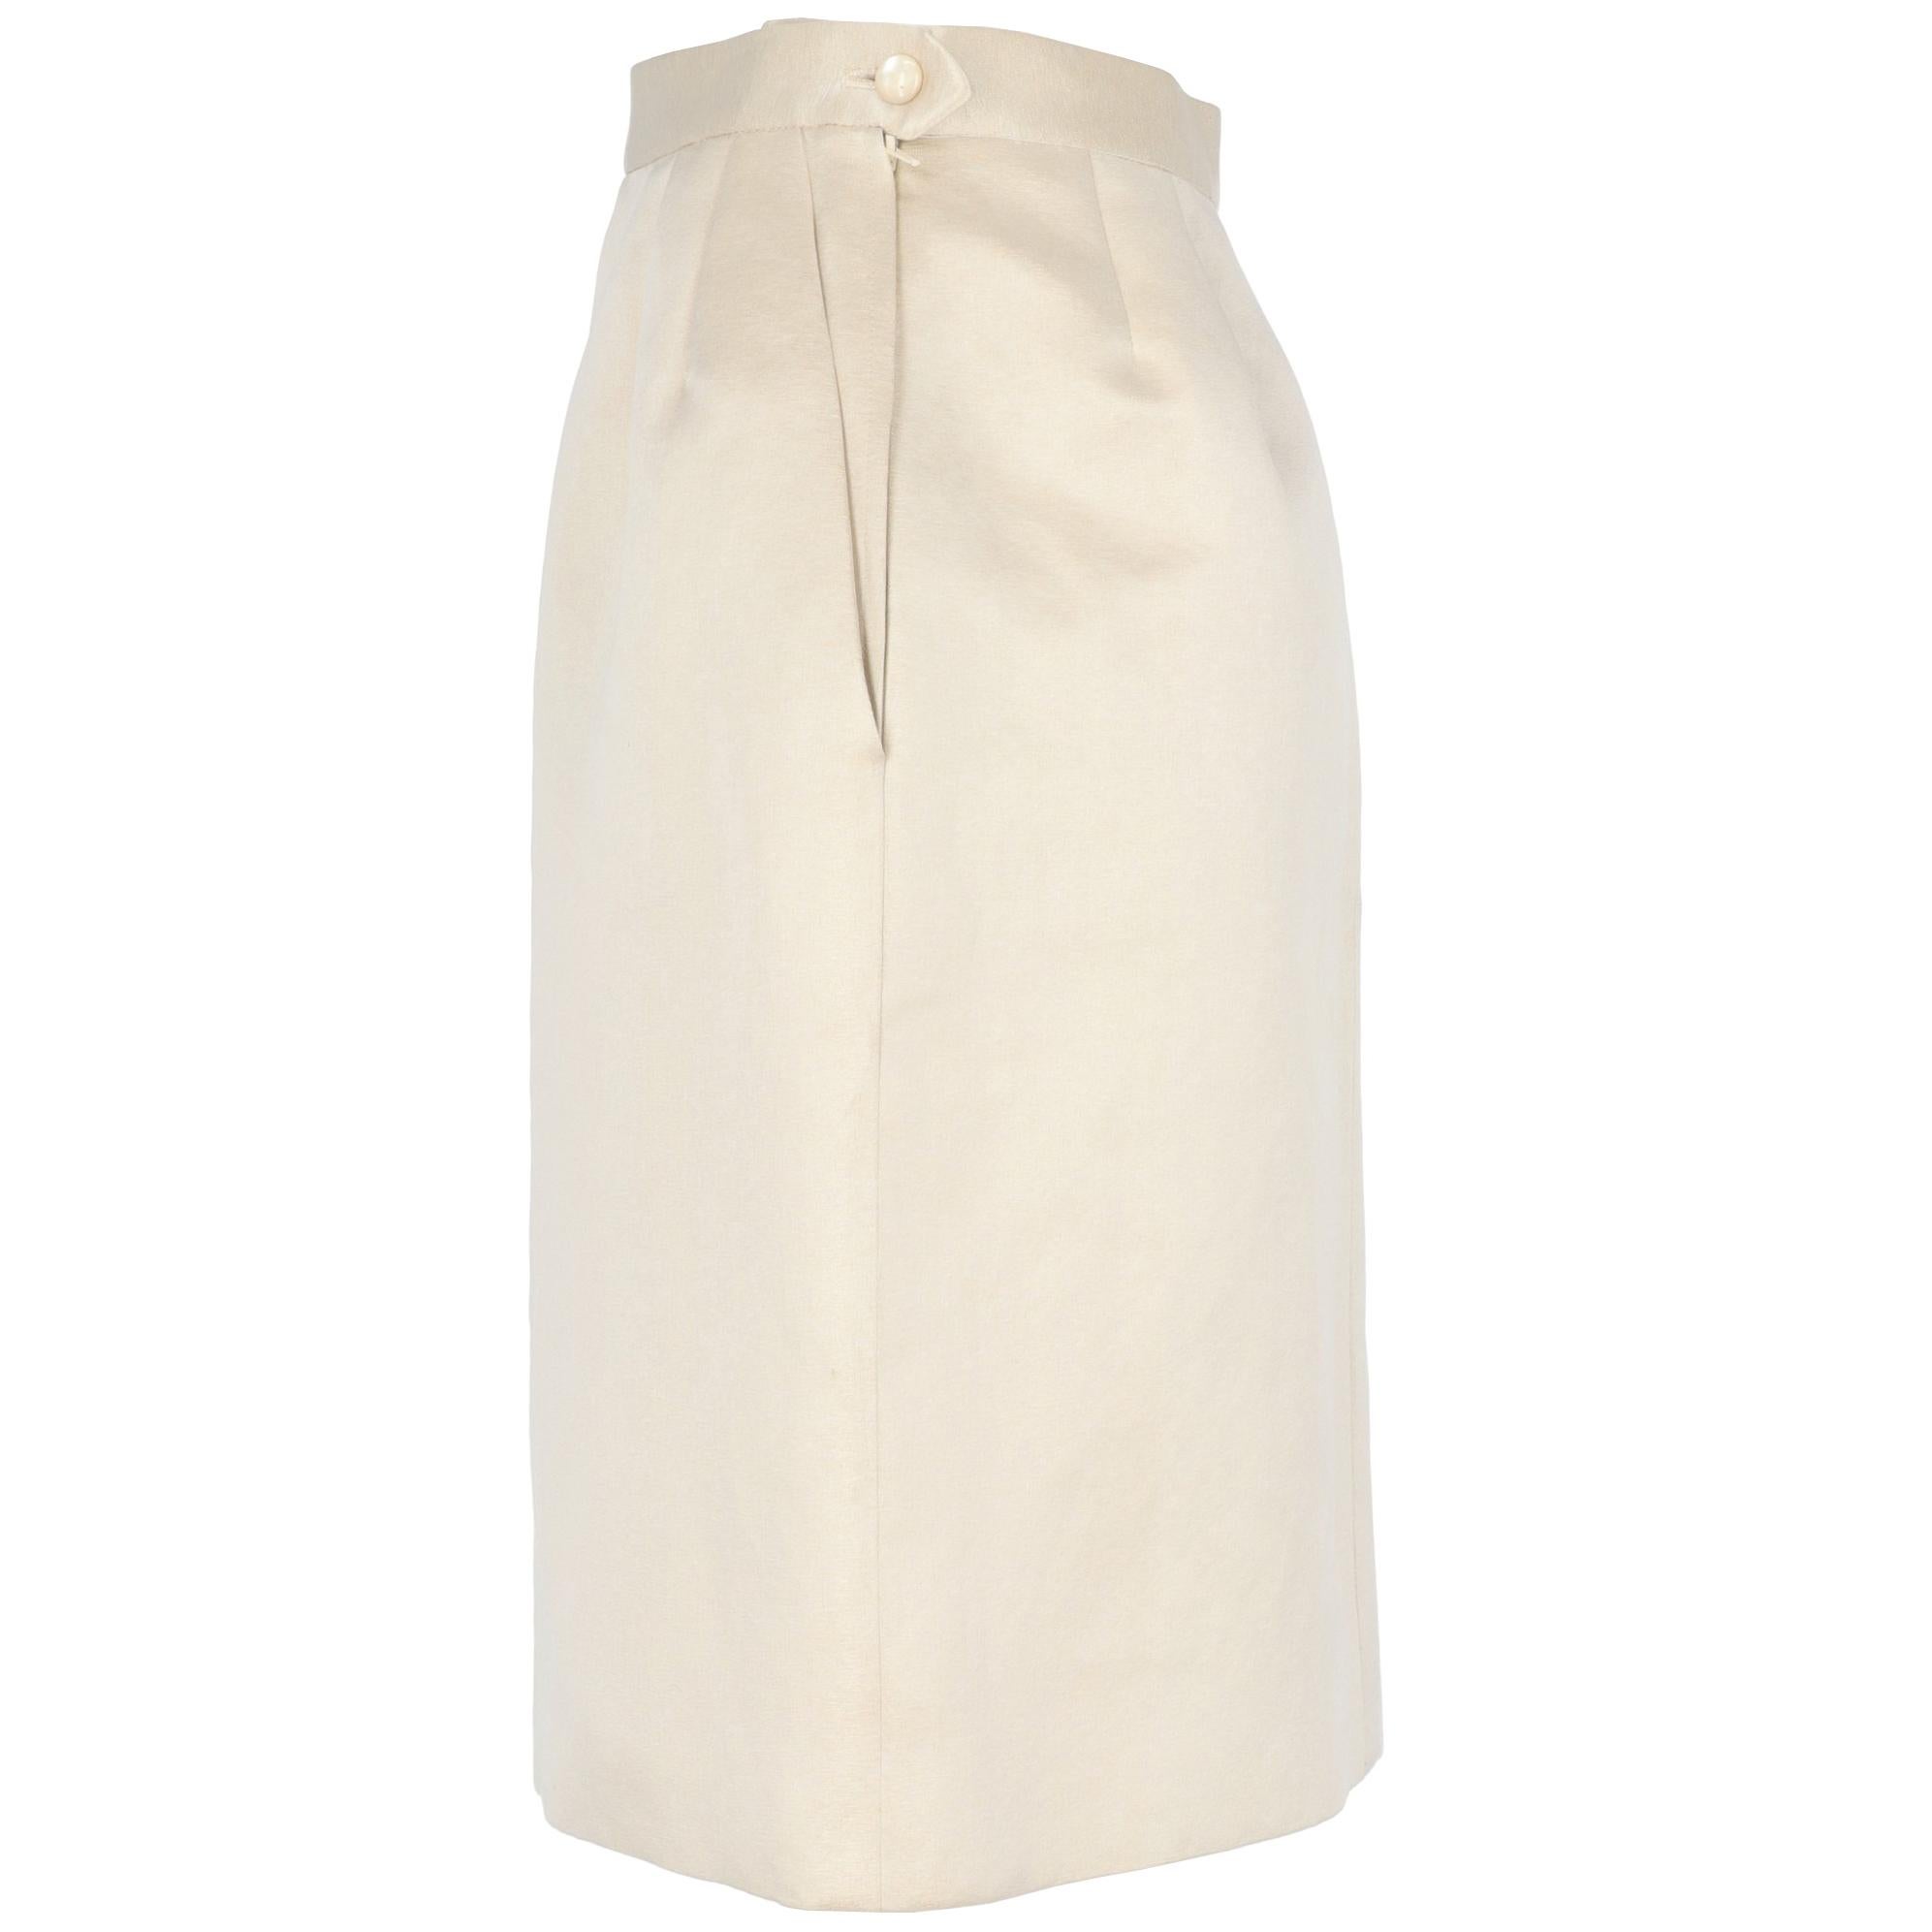 Yves Saint Laurent knee-length skirt in silk with golden weft thread, amphora model, double waist pinces, side closure with mother-of-pearl button and zip, side welt pockets and double pinces on the back. Acetate lining.

Years: 80s

Made in